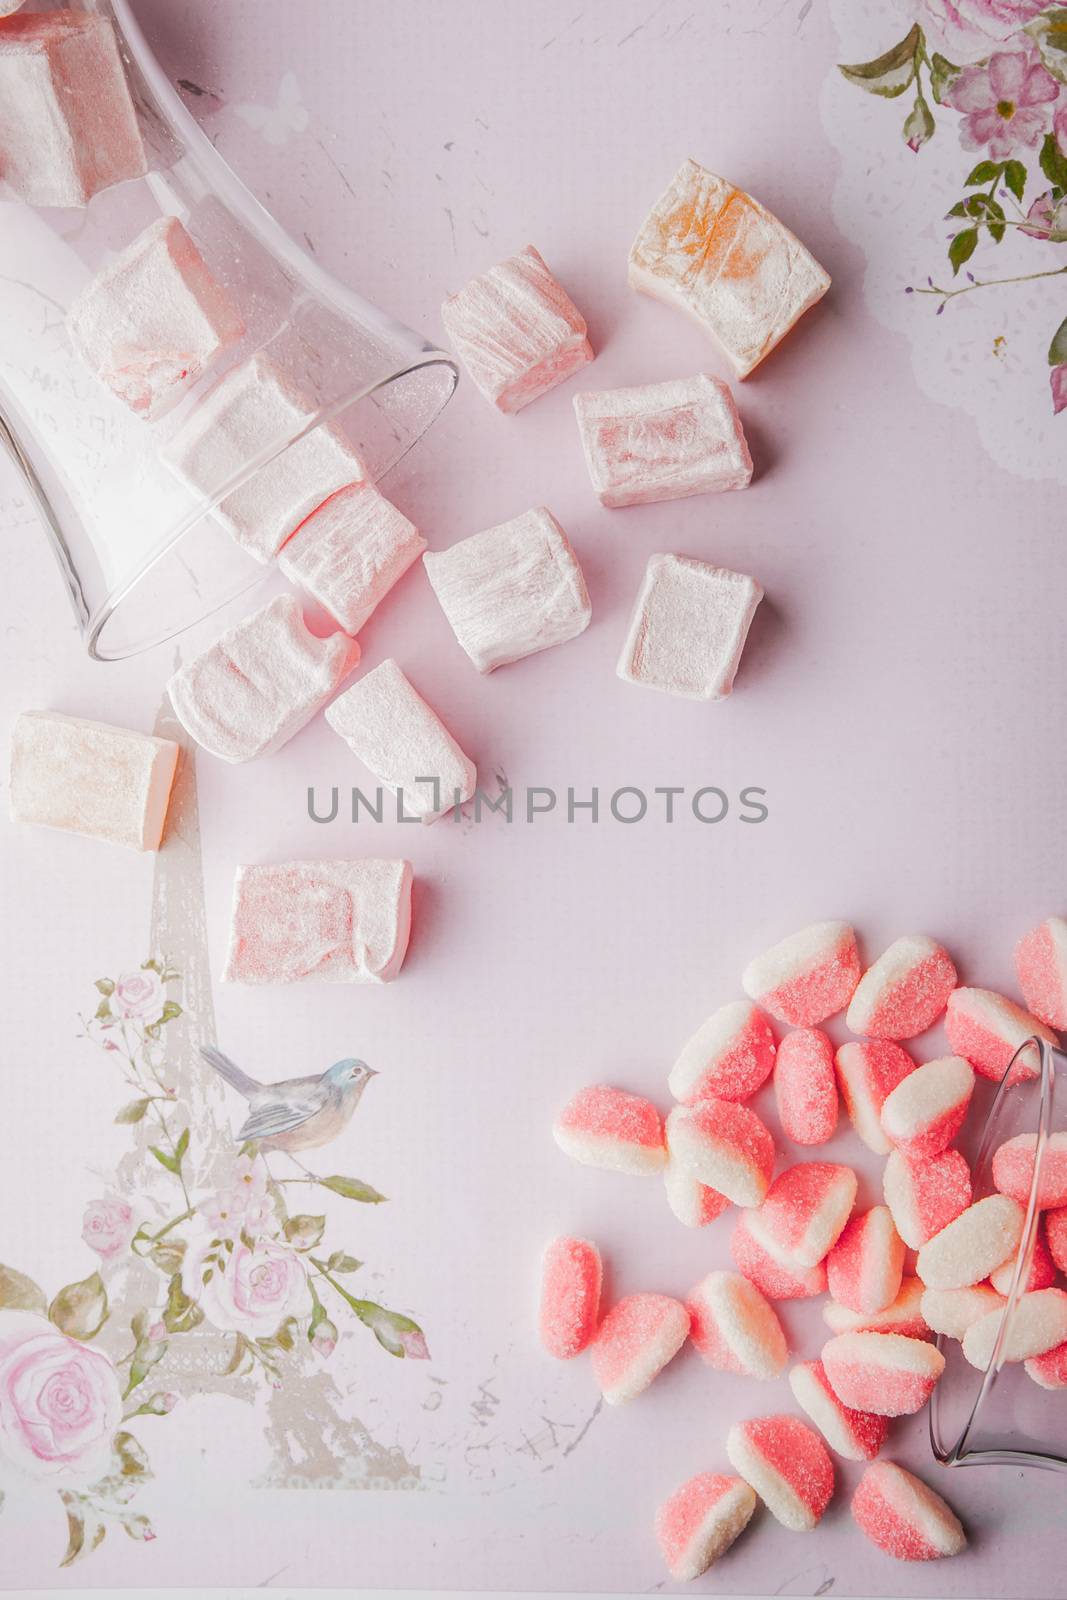 Turkish delight and fruit jellies on the romantic pink background by Deniskarpenkov